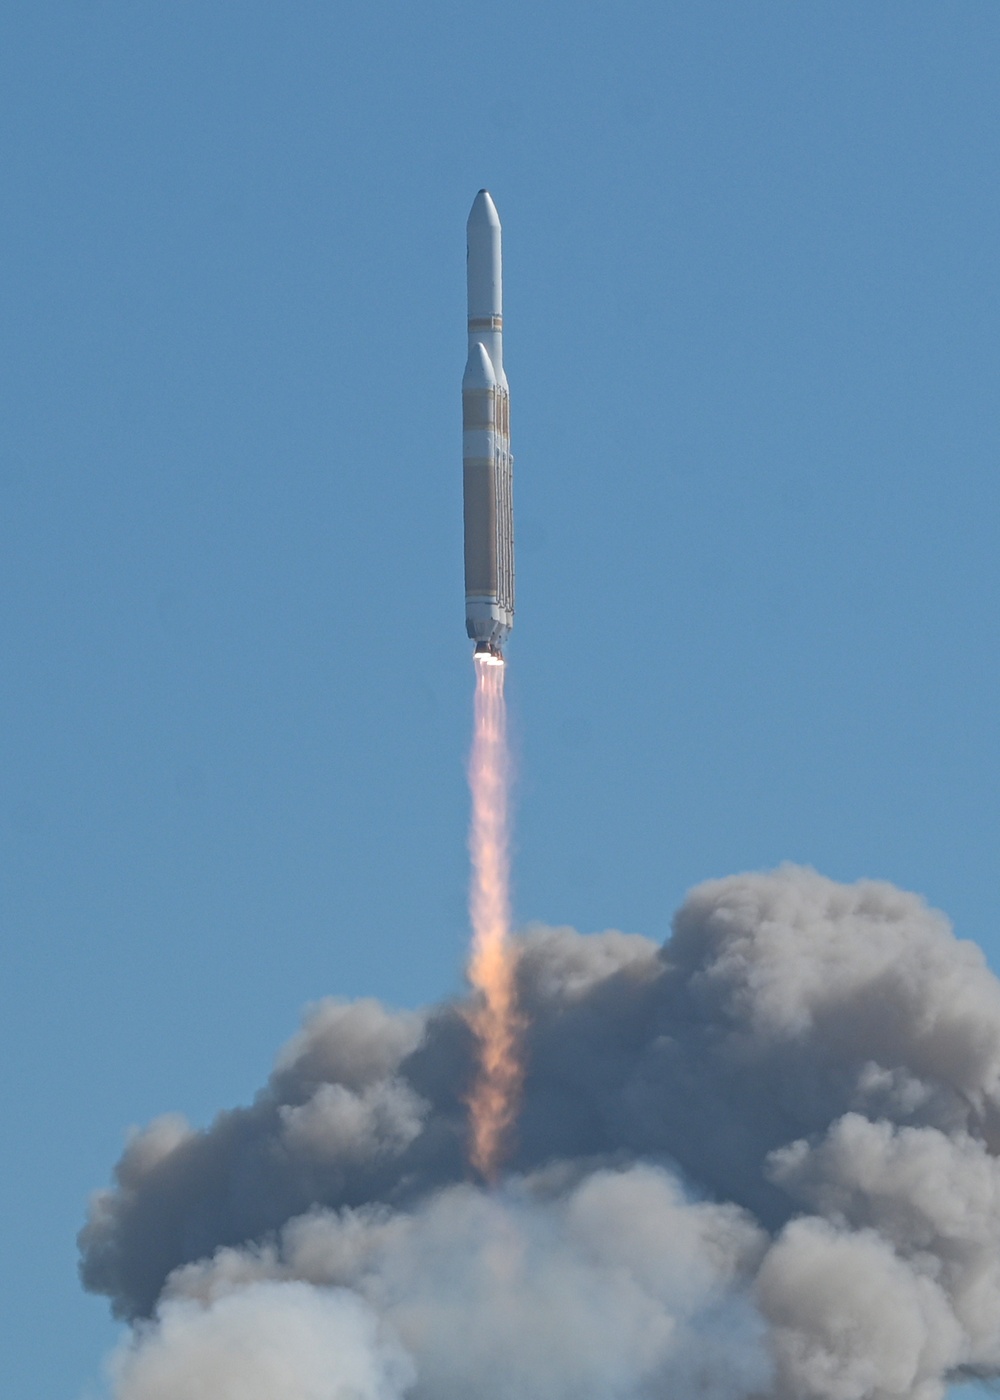 DVIDS Images Delta IV Heavy Launches For The Last Time From Vandenberg Image Of